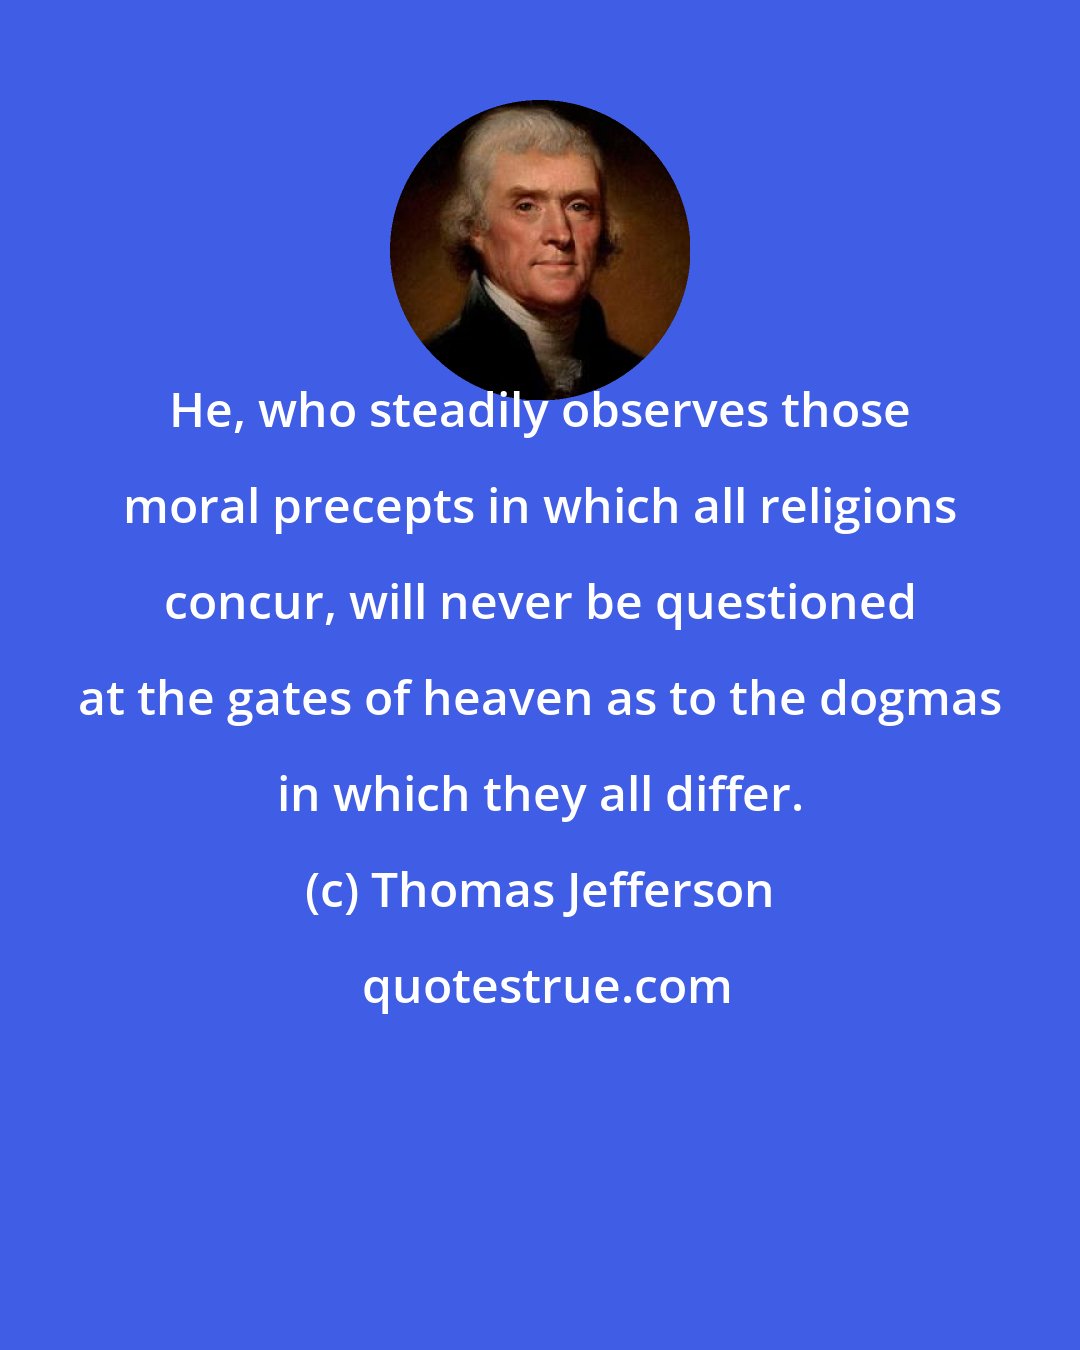 Thomas Jefferson: He, who steadily observes those moral precepts in which all religions concur, will never be questioned at the gates of heaven as to the dogmas in which they all differ.